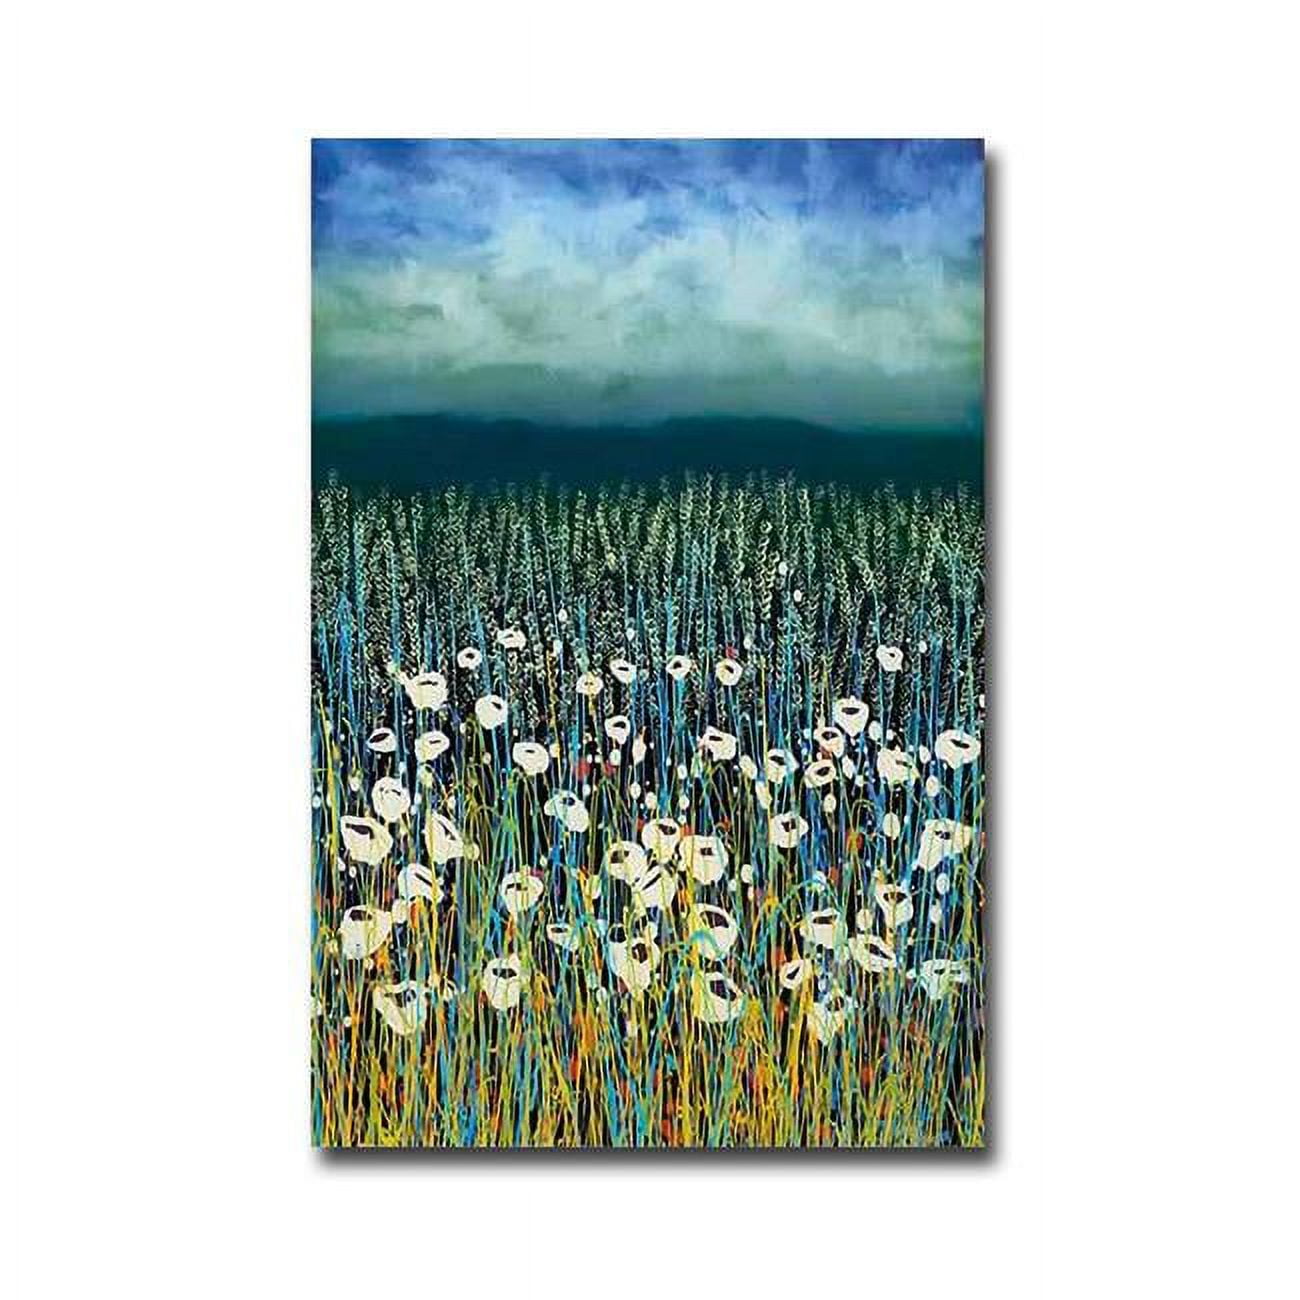 30456848eg Poems In Blue By Daniel Lager Premium Oversize Gallery-wrapped Canvas Giclee Art - 45 X 30 In.